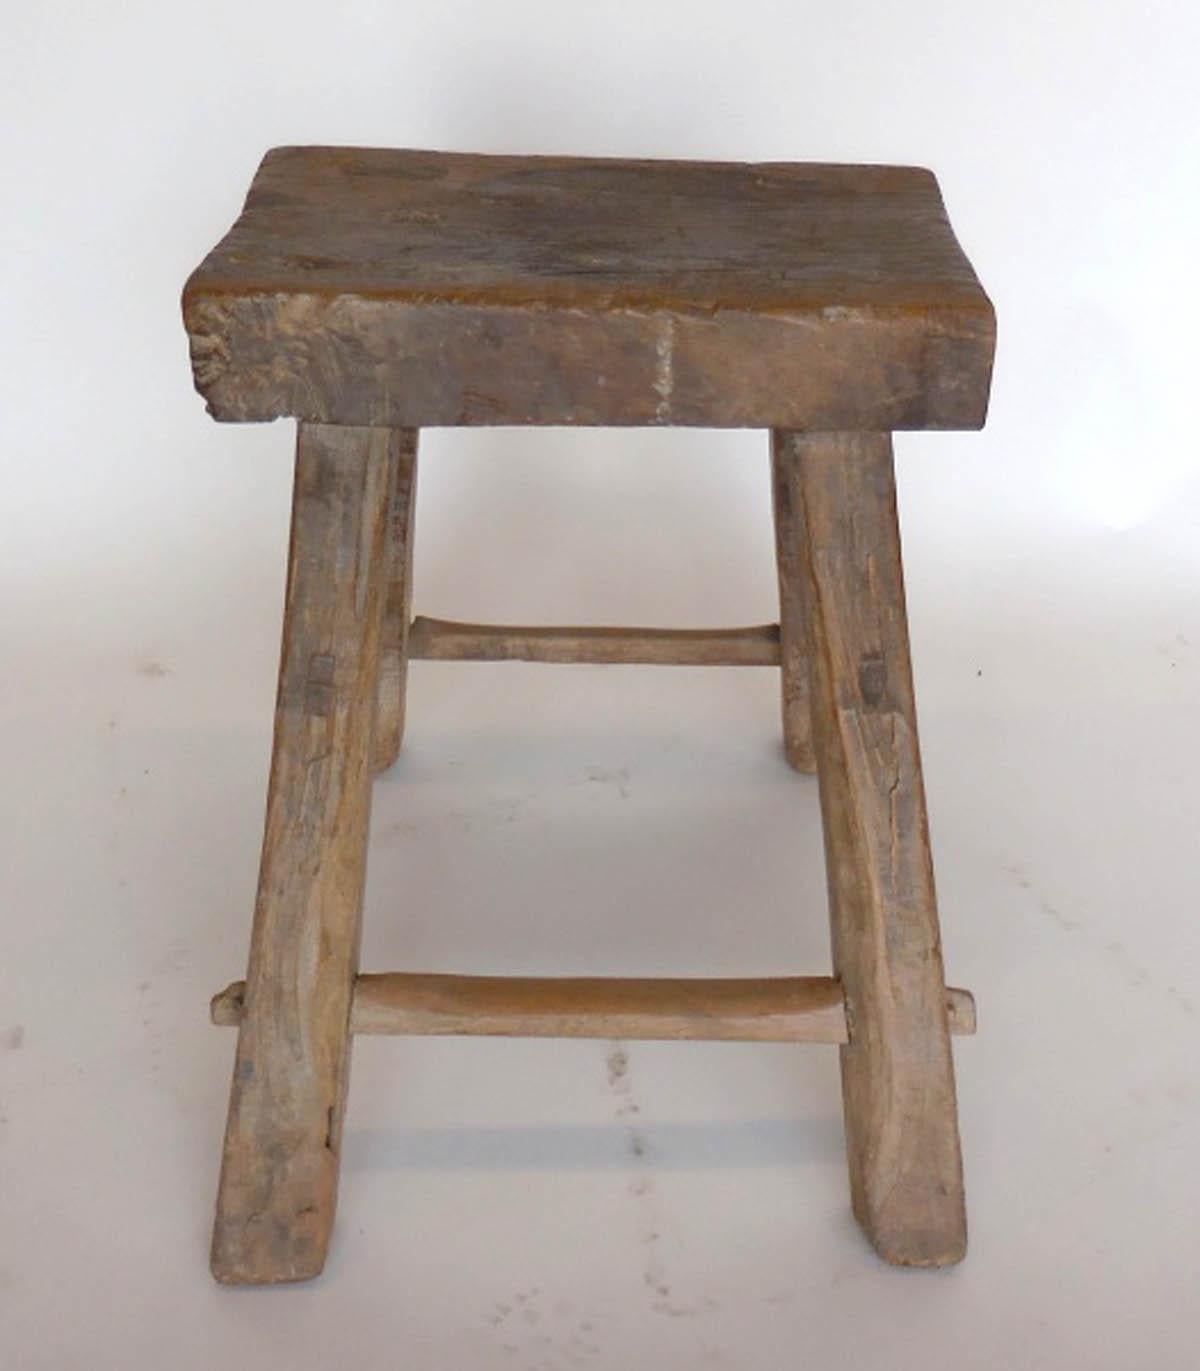 Antique Chinese rustic elm wood stool with flared legs. Mortise and tenon construction. Great old weathered patina. The seat measures 17.25 by 11 by 3 inches thick.